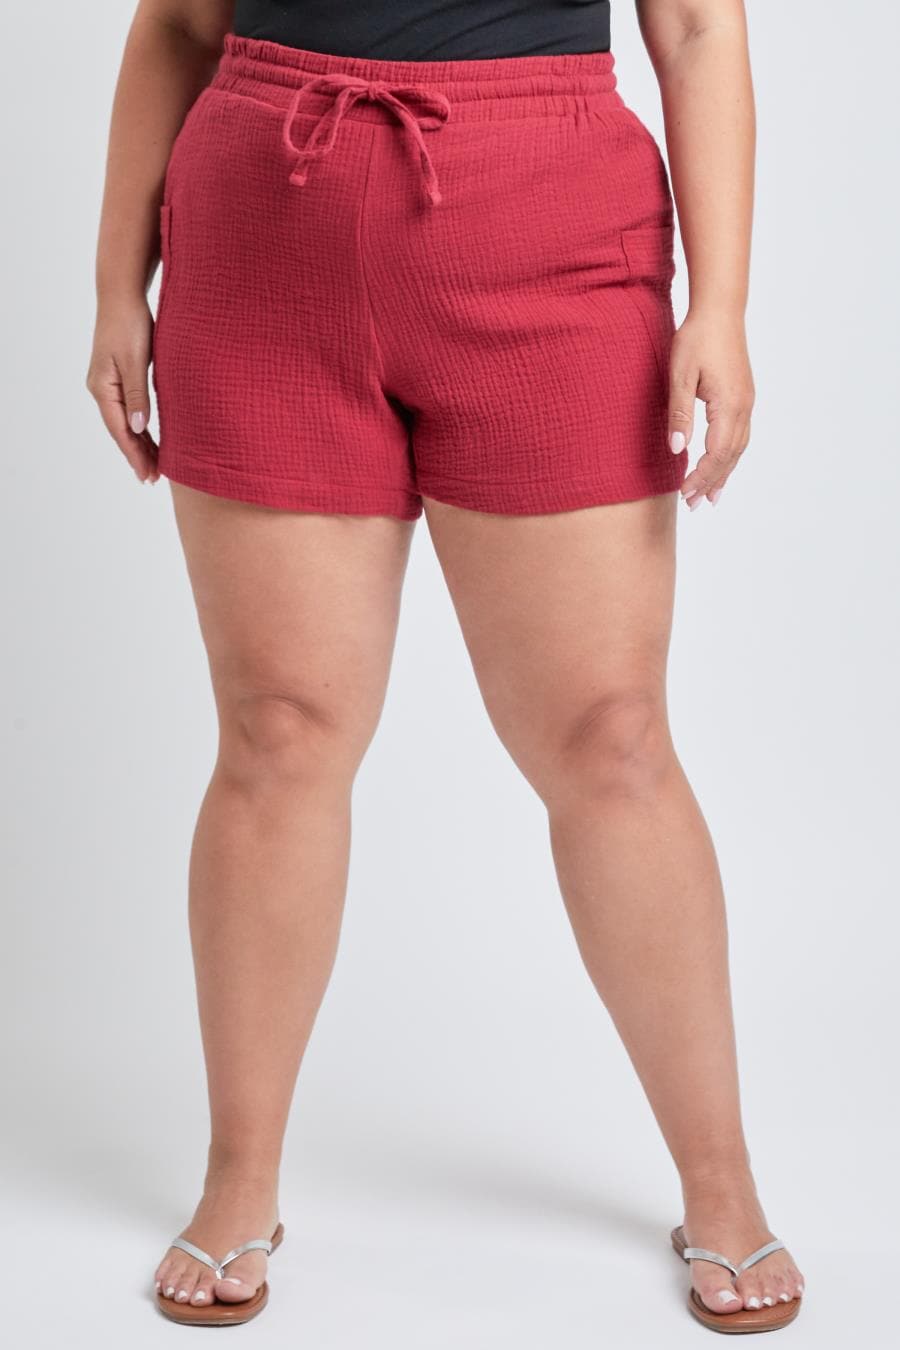 Women's Plus Size Cotton Shorts With Side Patch Pocket